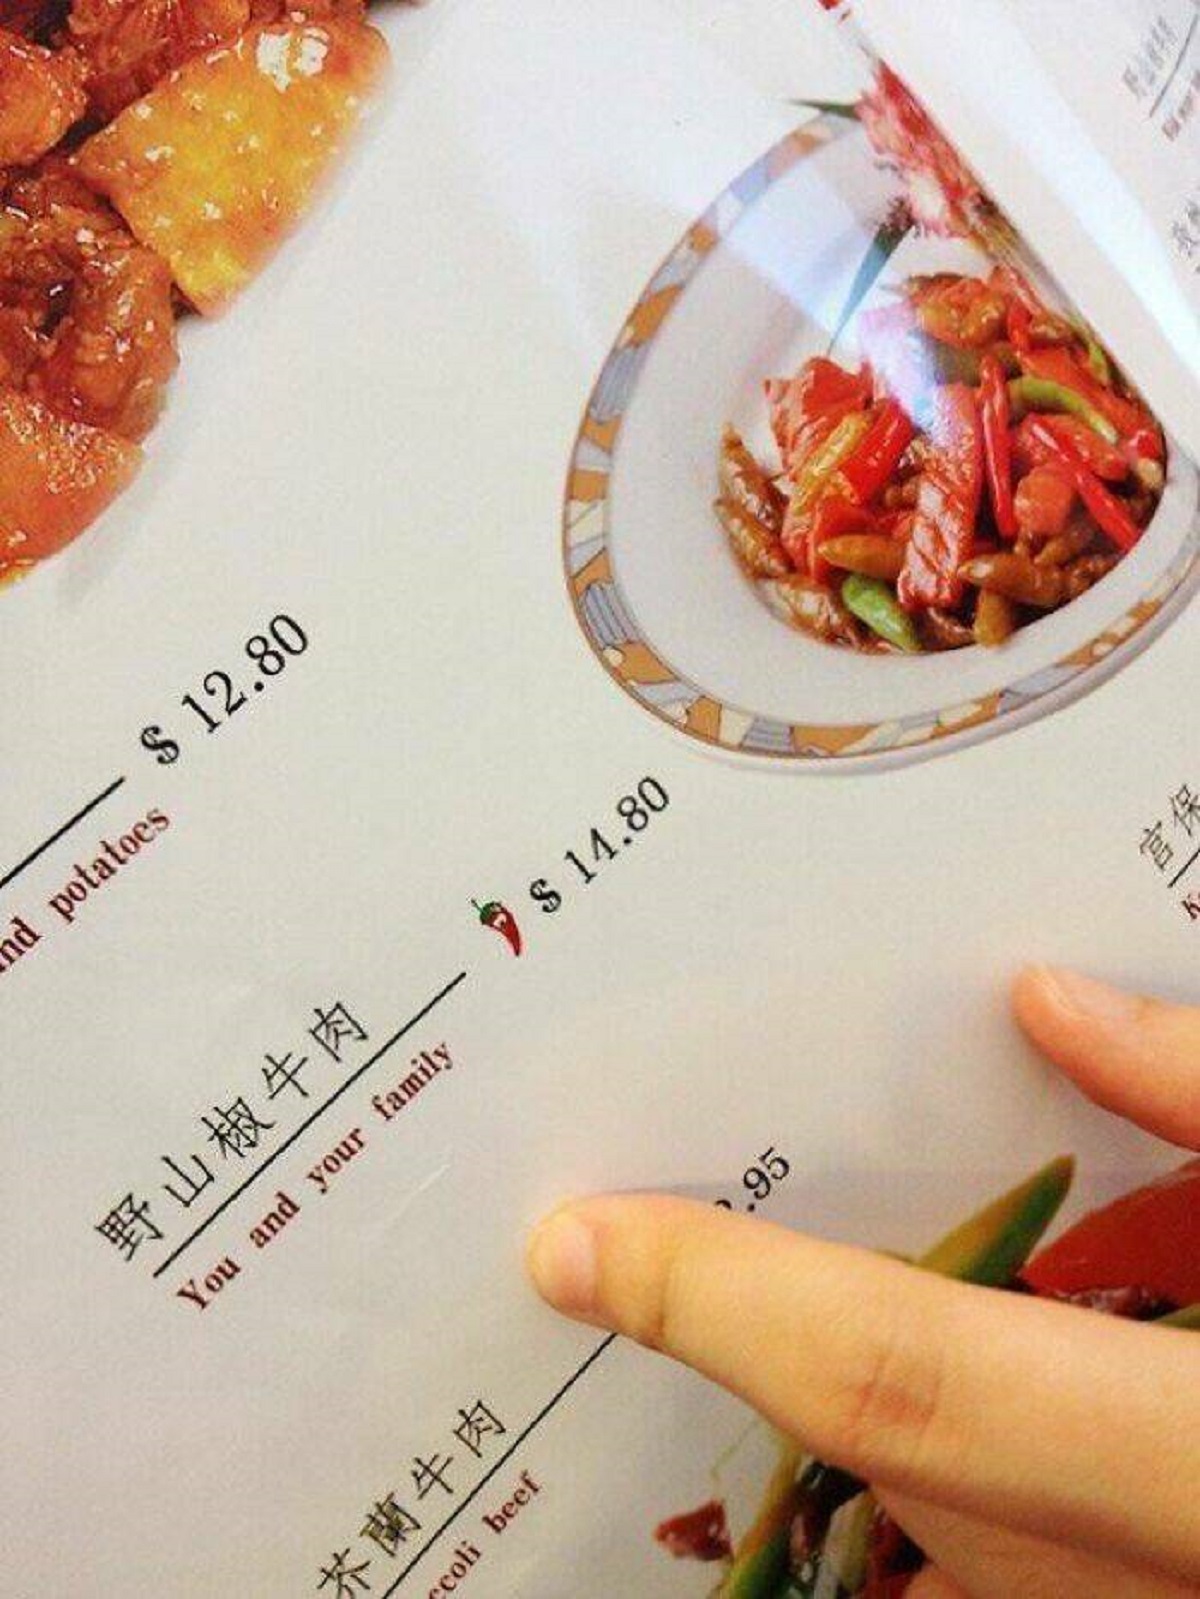 menu translation fails - and potatoes $ 12.80 You and your family coli beef 4 $14.80 .95